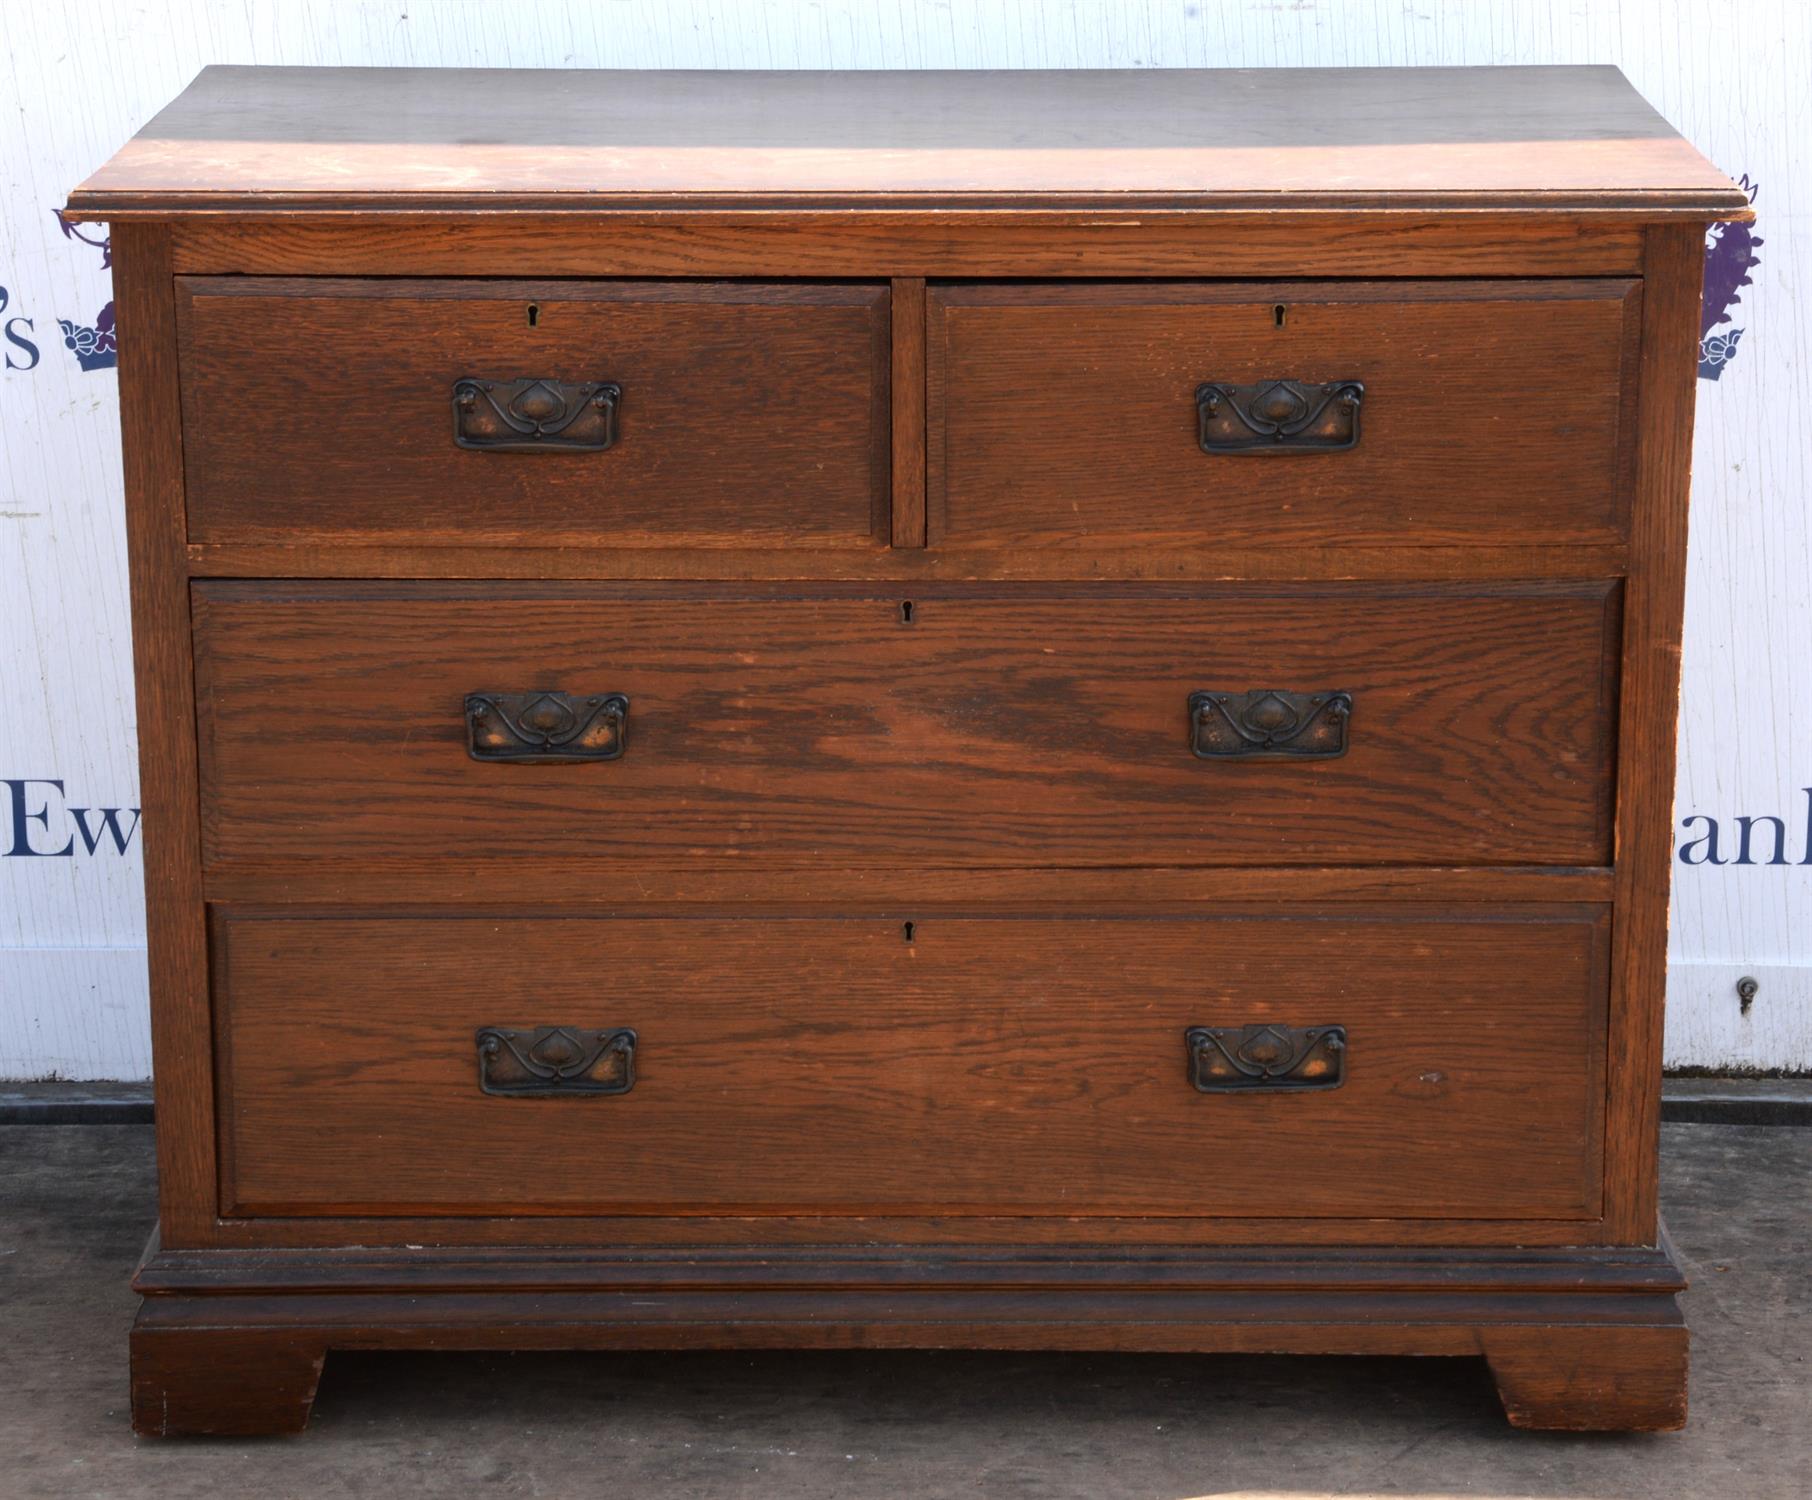 An Edwardian oak dressing chest of drawers, formerly with mirror surmount, the bracket feet with